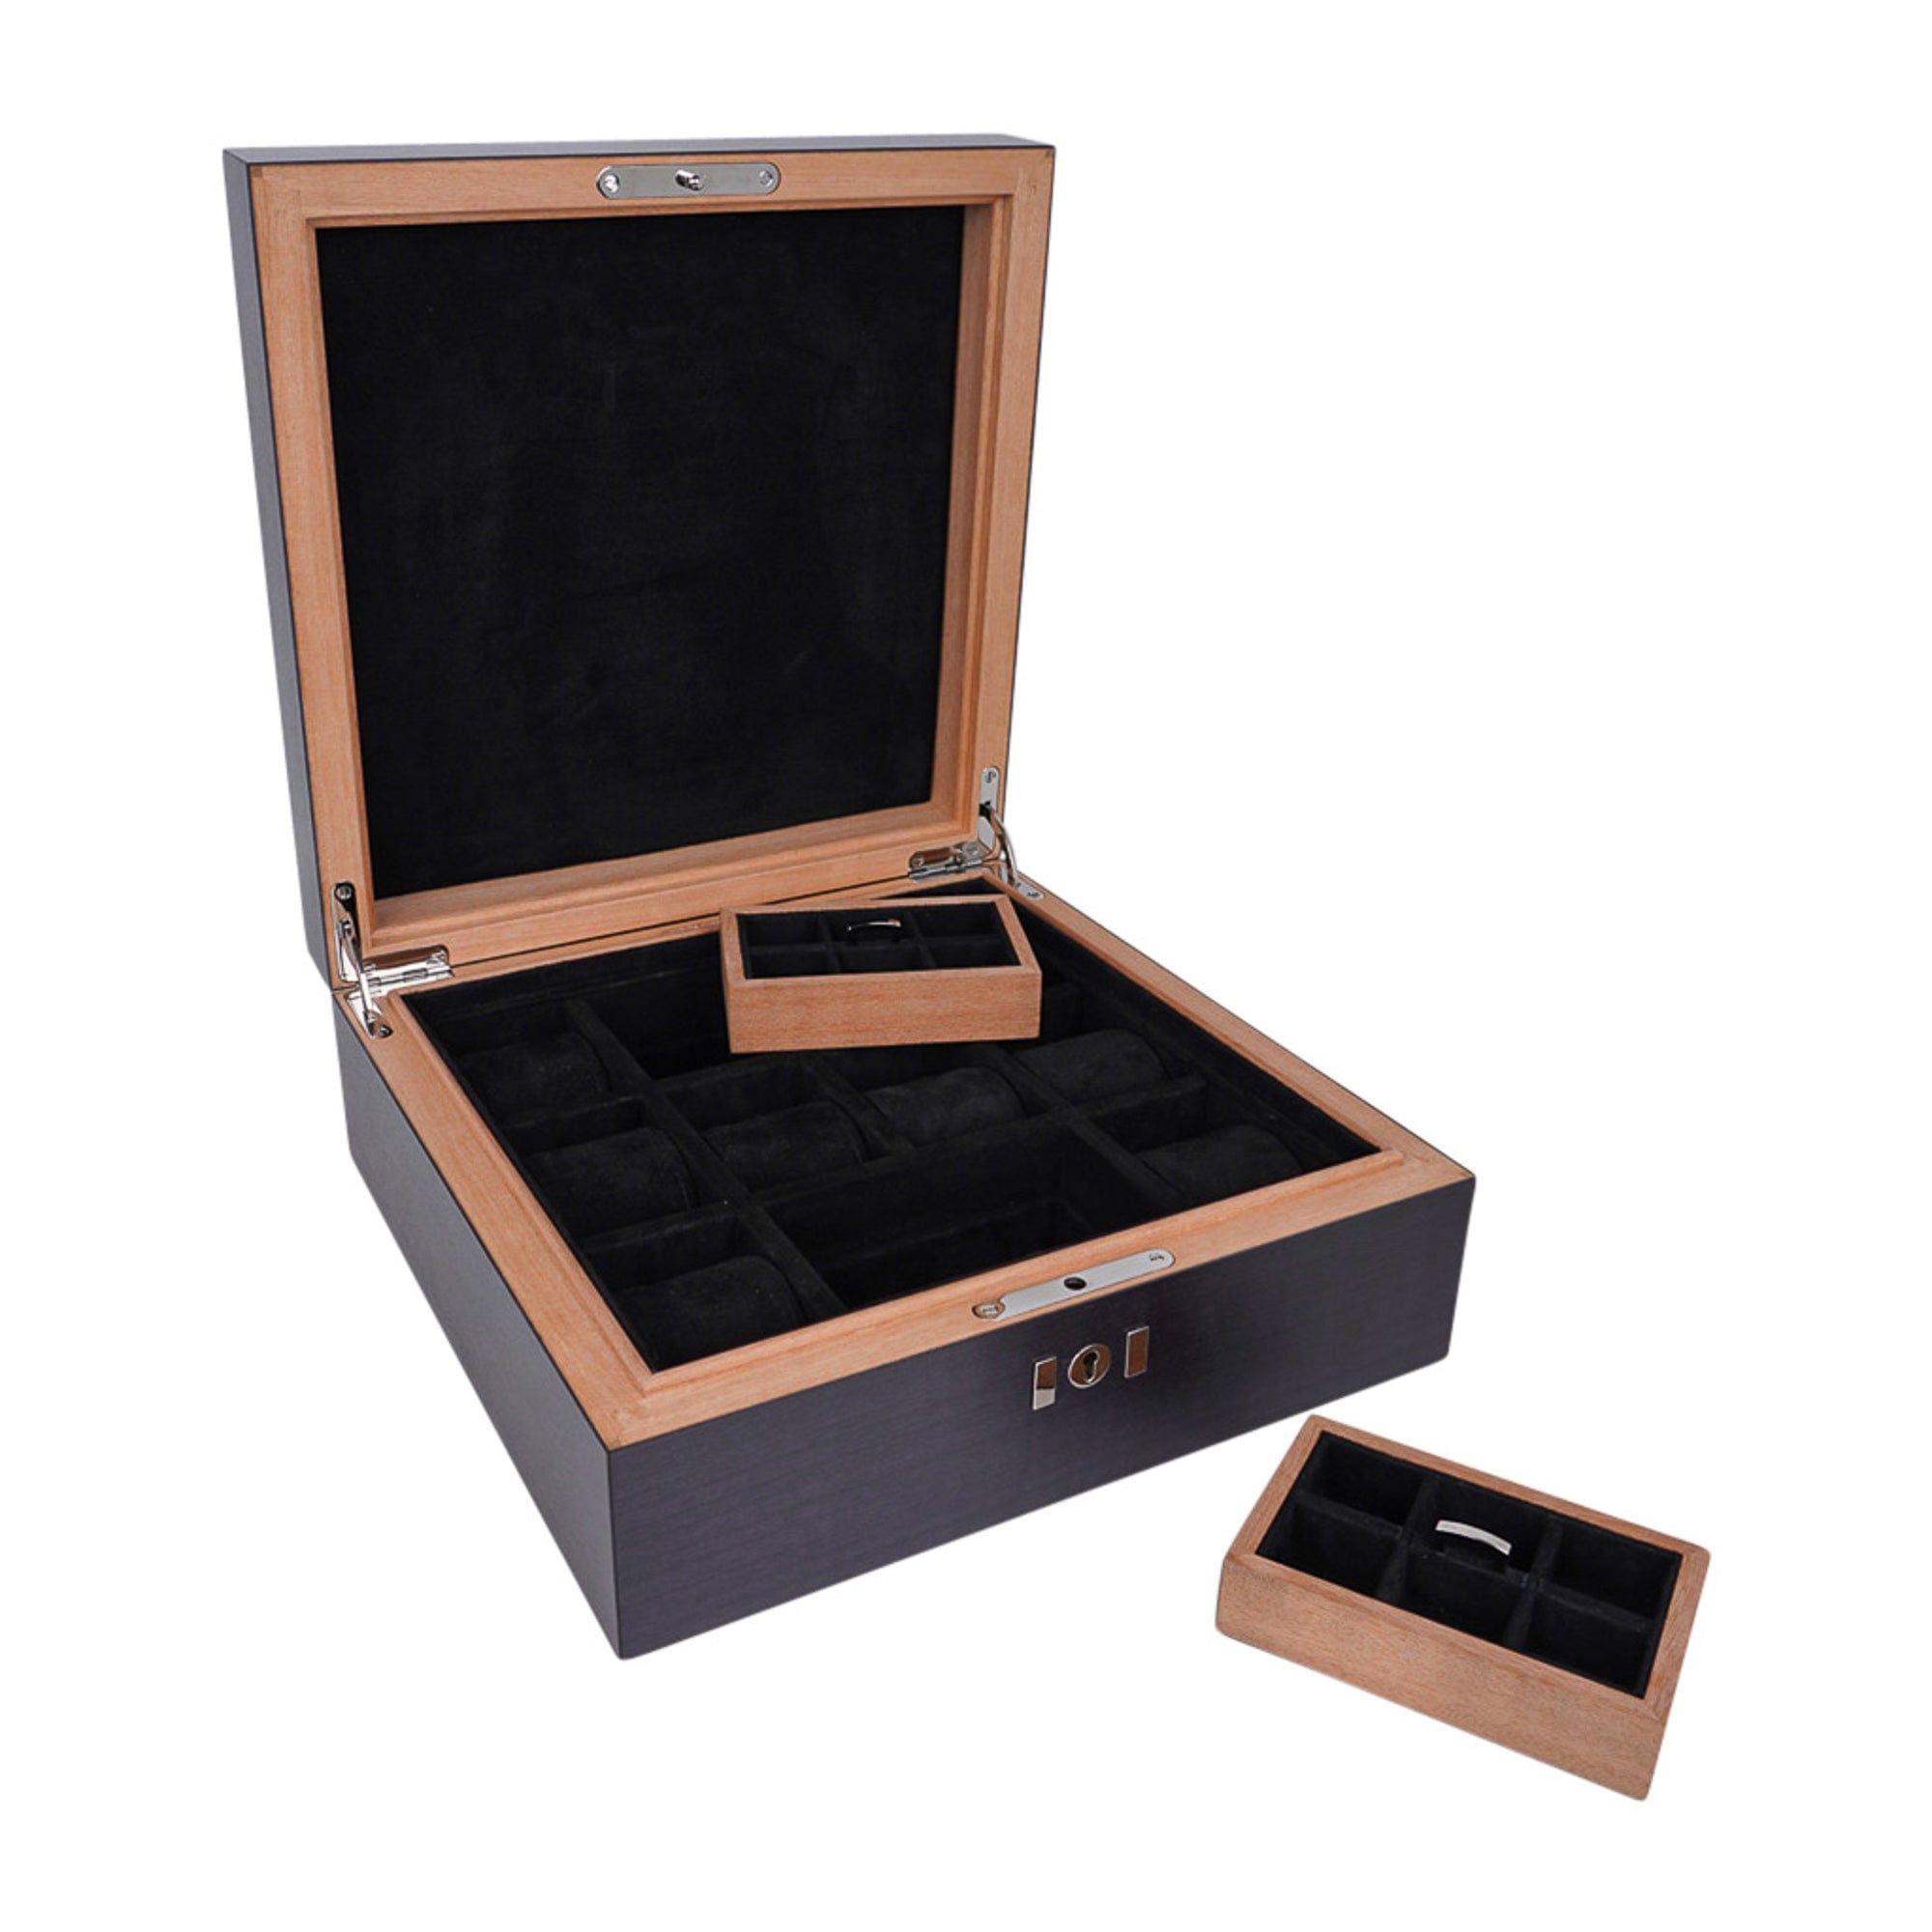 Hermes B09 Luxurious Large Mahogany Wood Box for 2 Watches New!